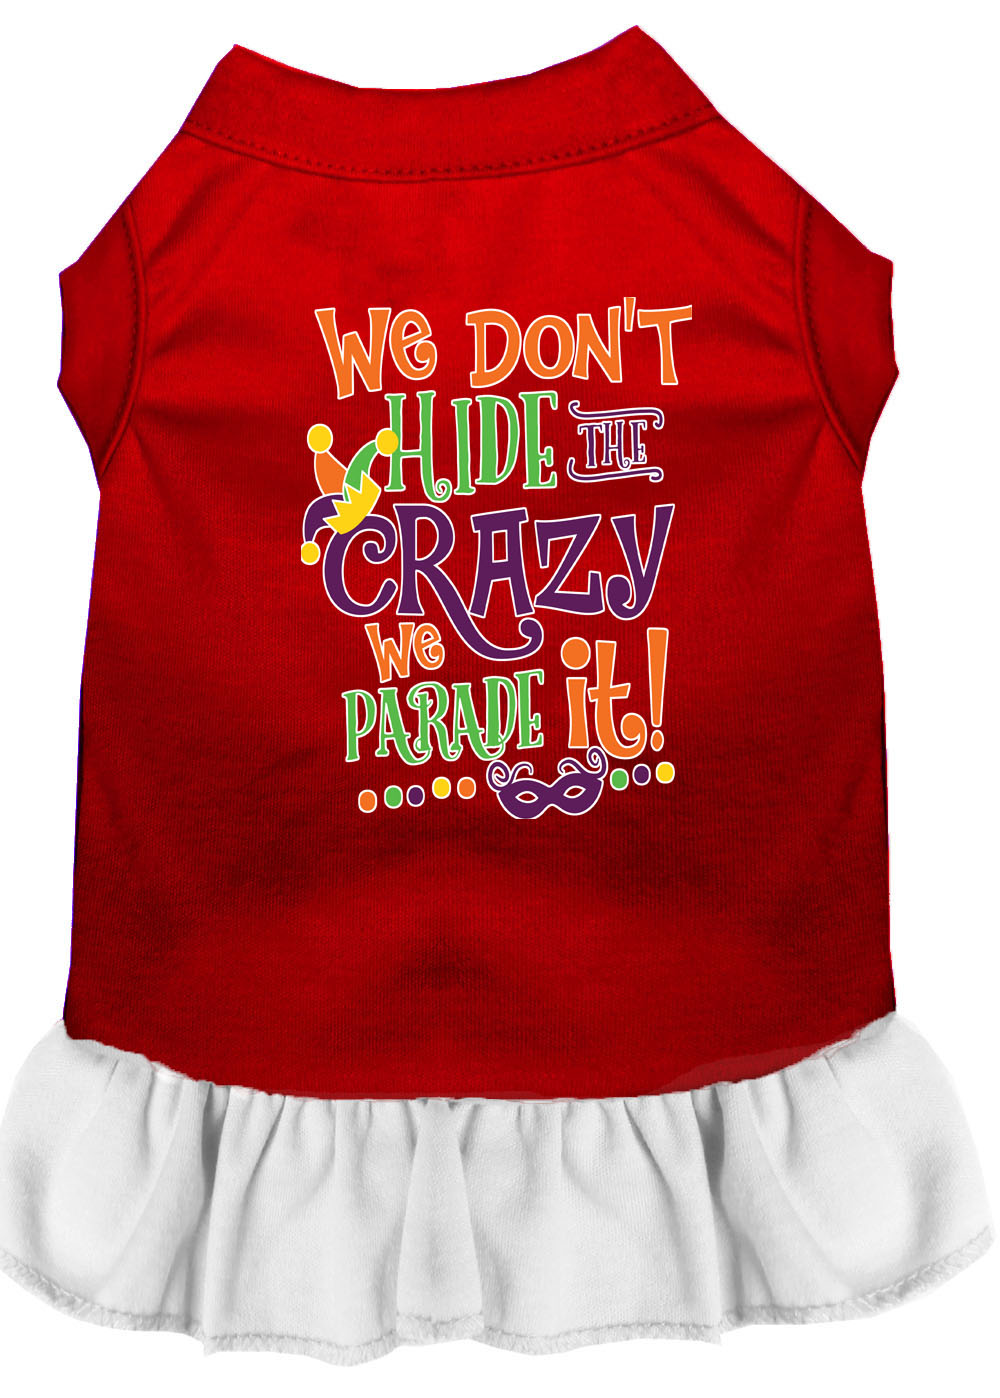 We Don't Hide the Crazy Screen Print Mardi Gras Dog Dress Red with White XXXL